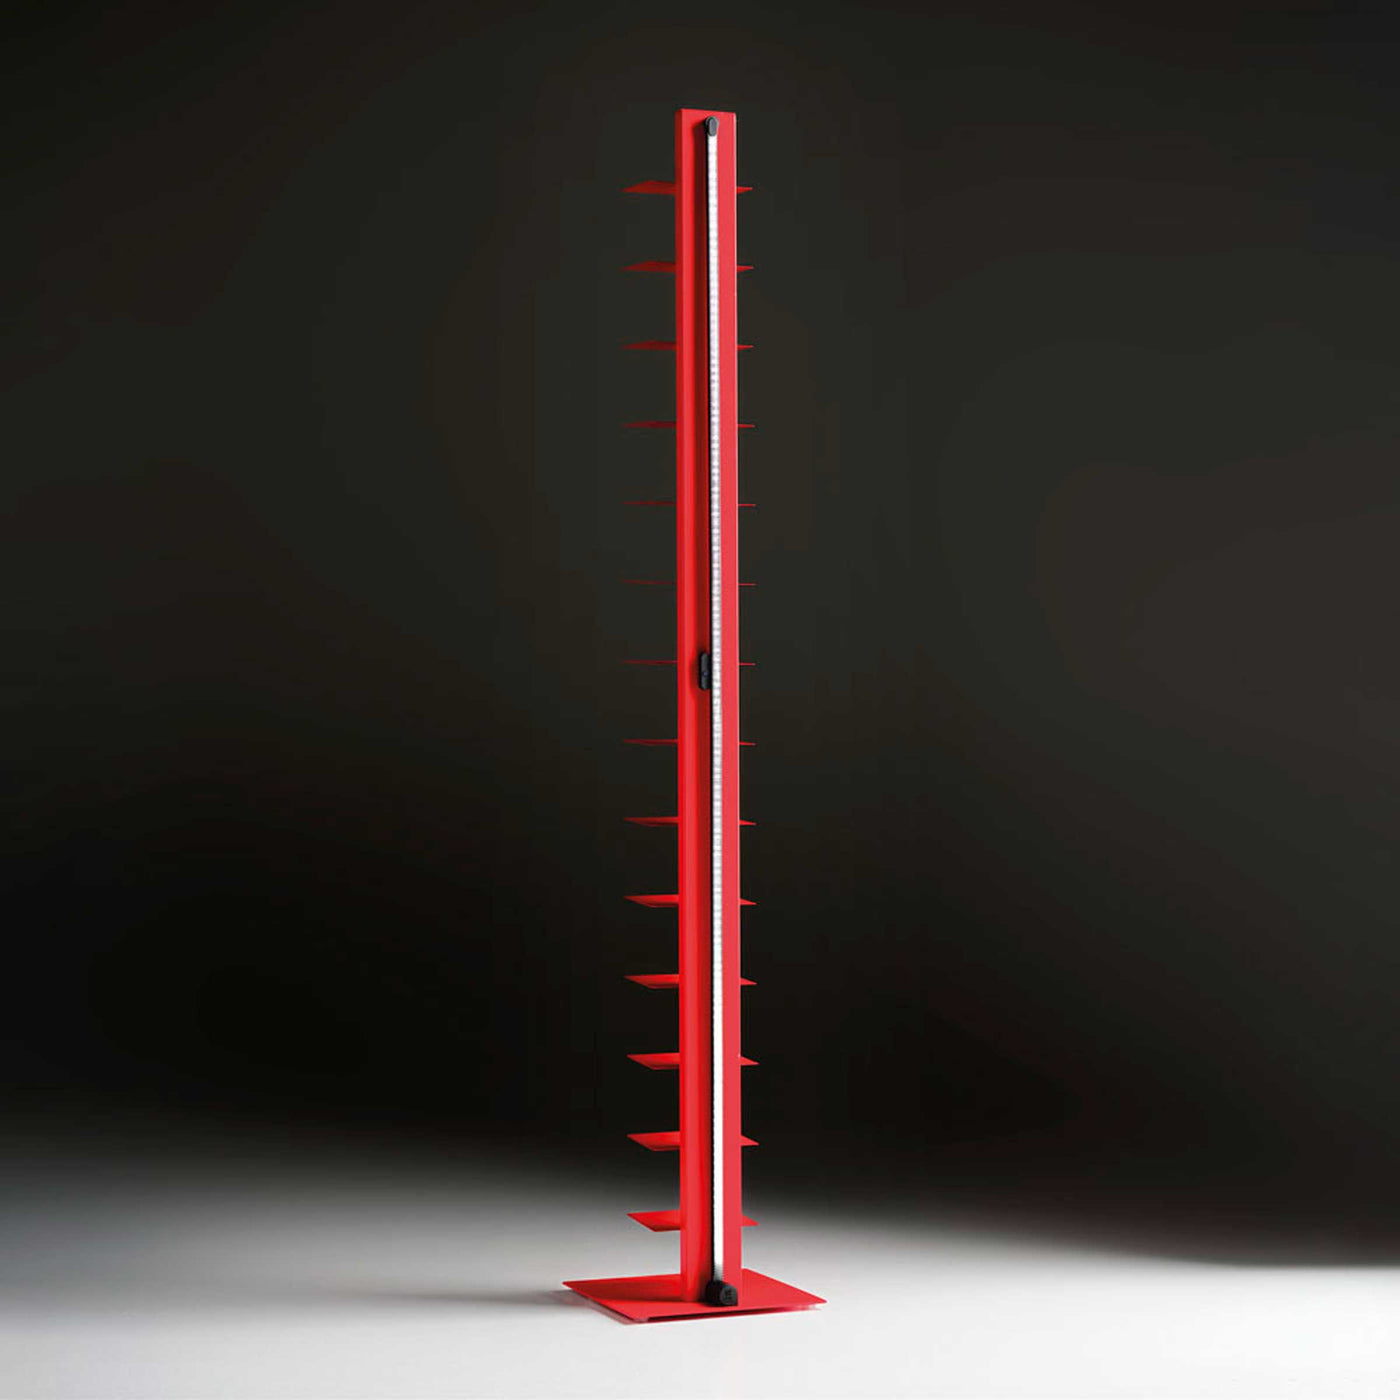 Dimmable LED Lamp LUX by Edoardo Radice for BBB Italia 08